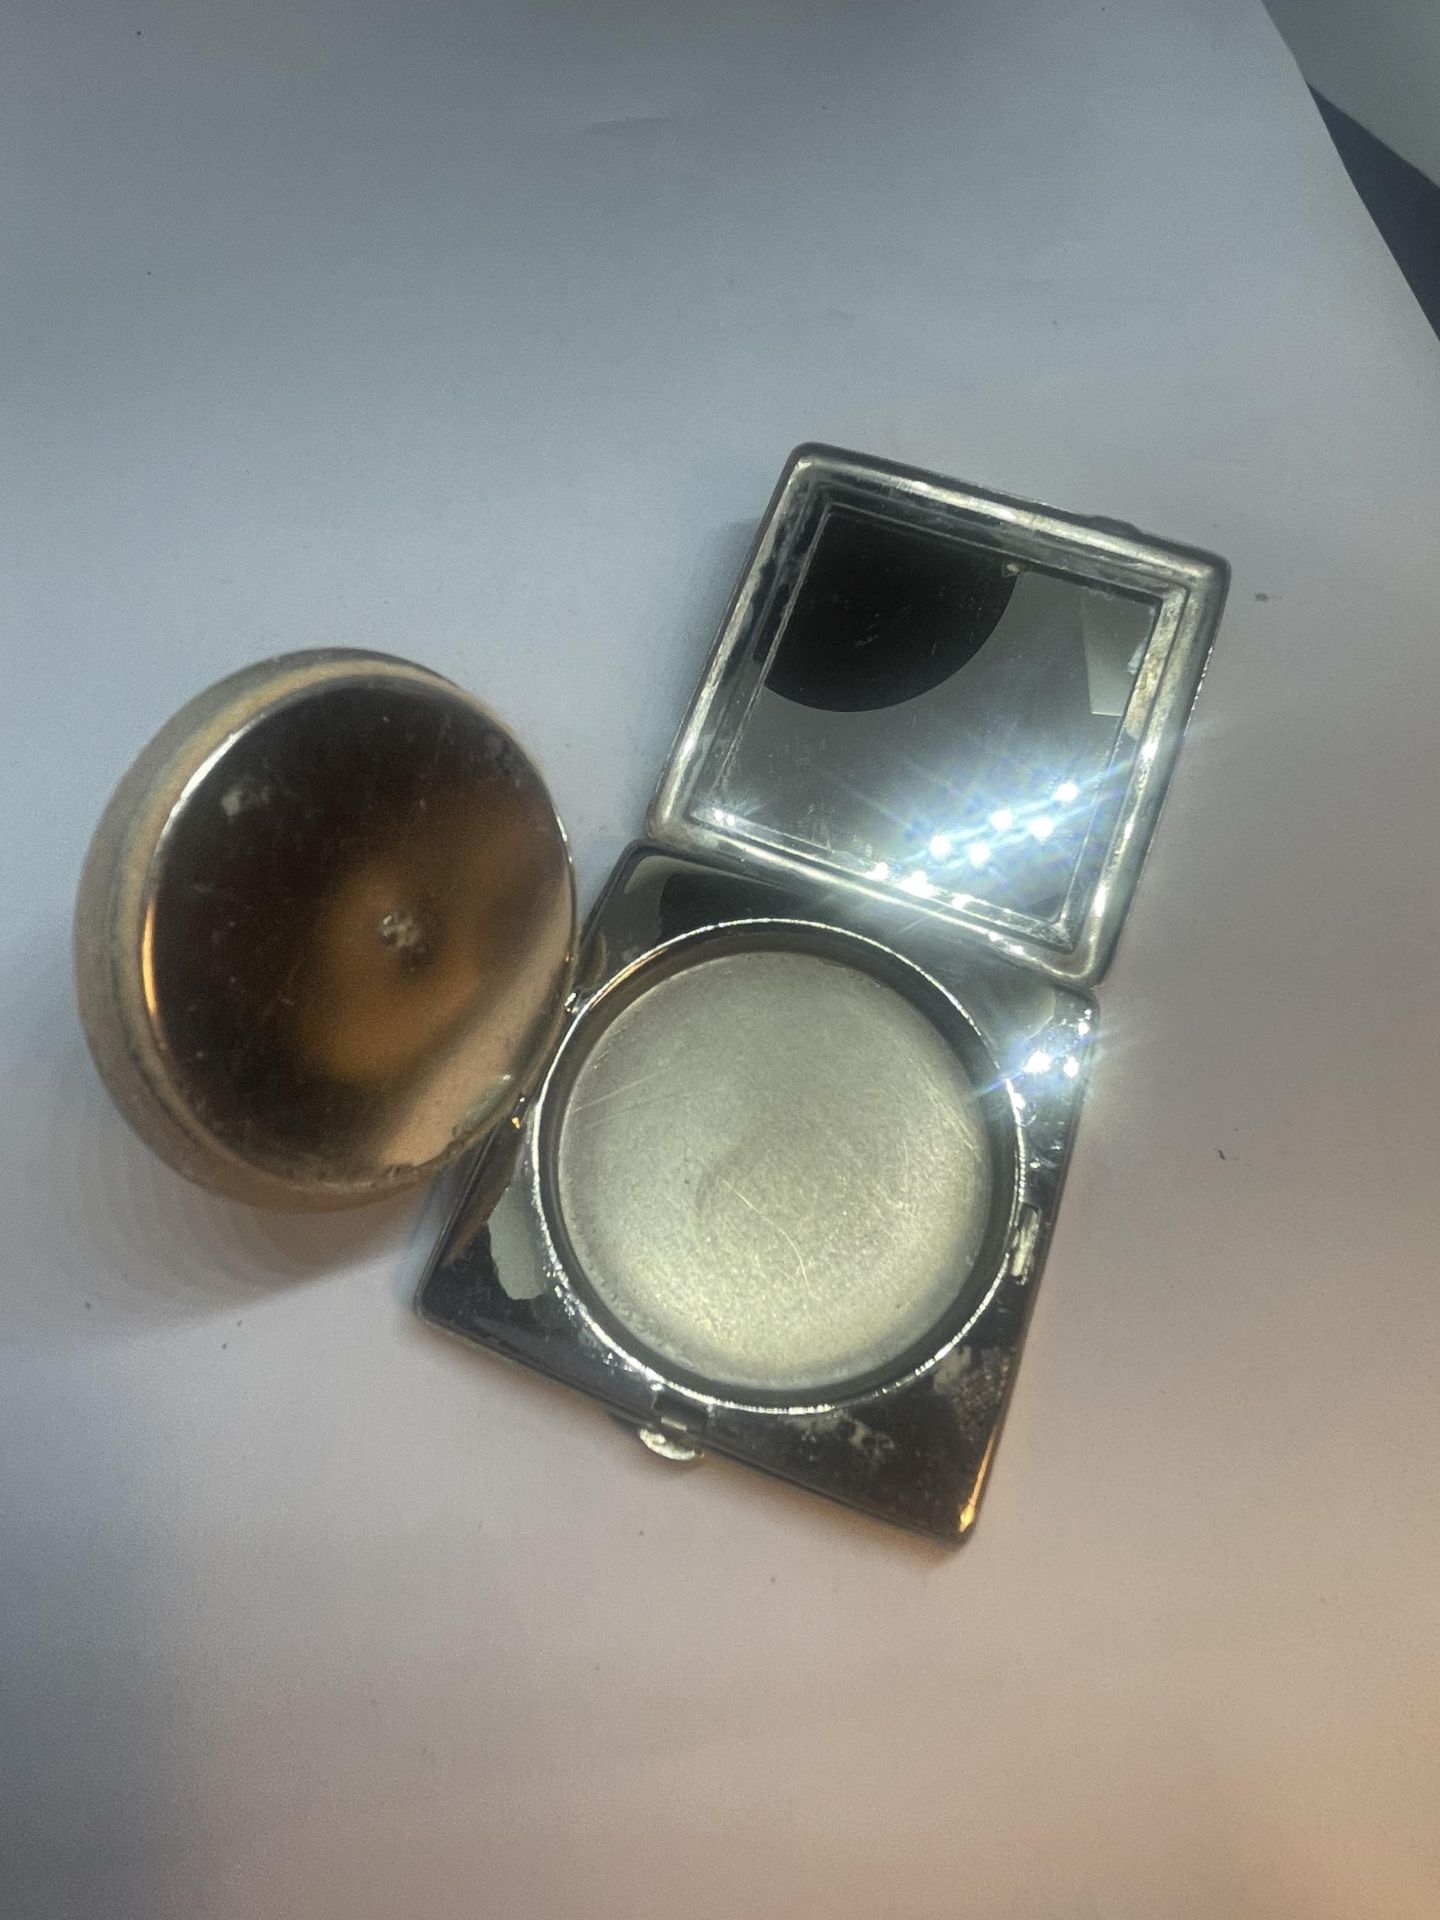 A VINTAGE YARDLEY POWDER COMPACT WITH INNER MIRROR - Image 3 of 4